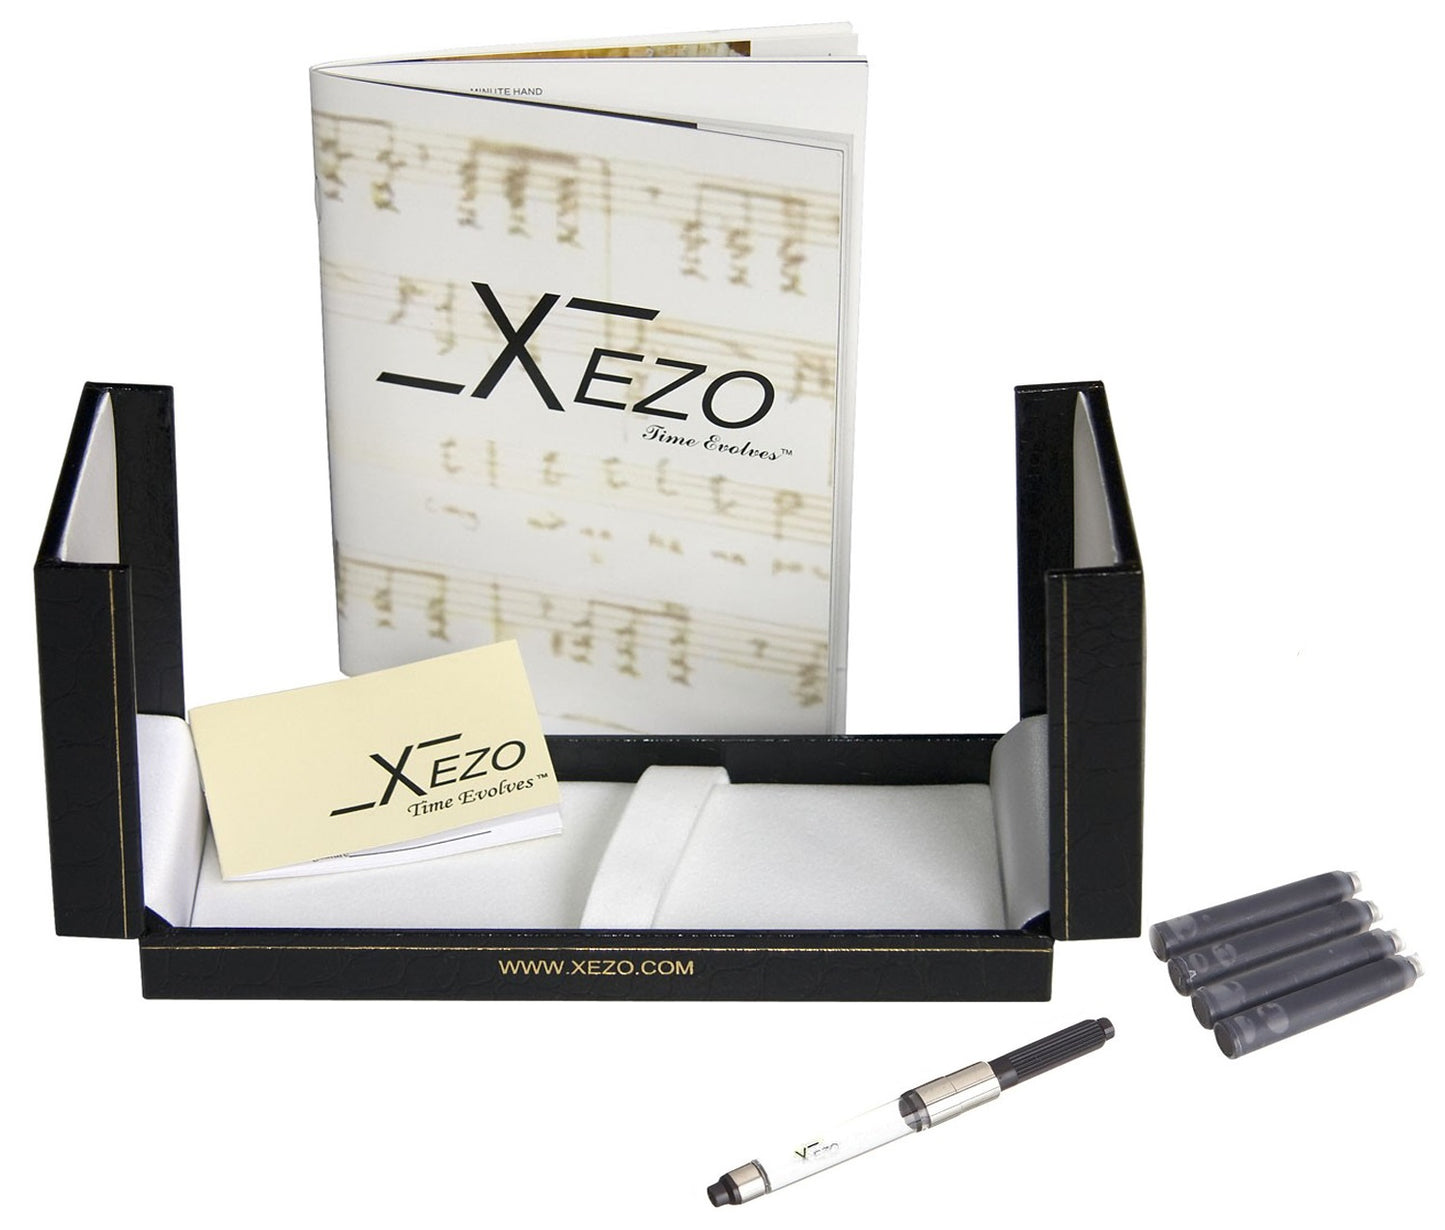 Xezo - Black gift box, certificate, manual, chrome-plated ink converter, and four ink cartridges of the Visionary Red/Black FM fountain pen